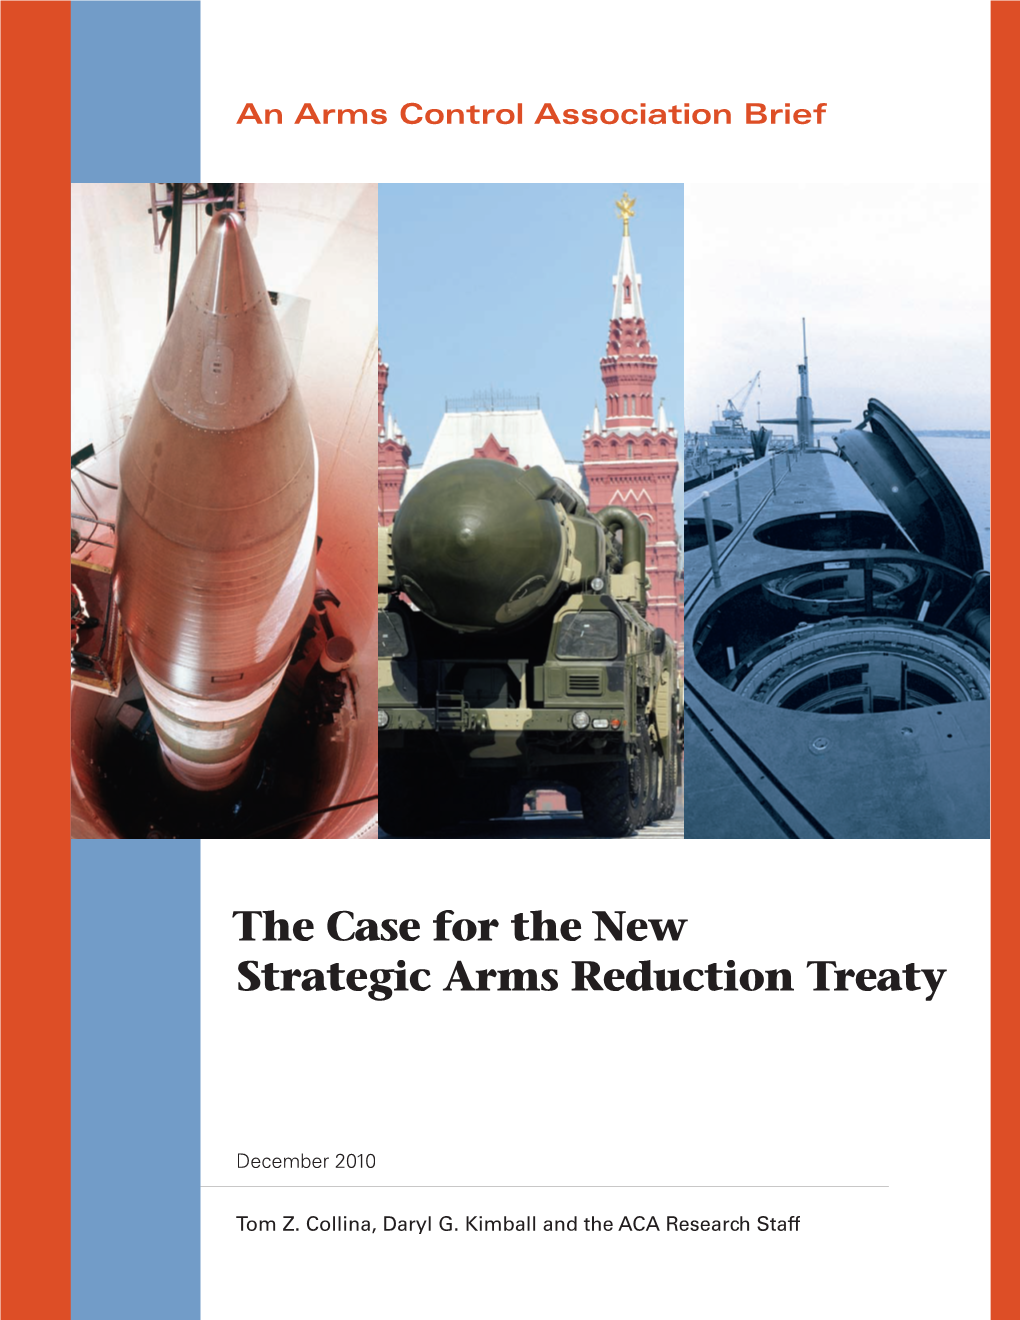 The Case for the New Strategic Arms Reduction Treaty